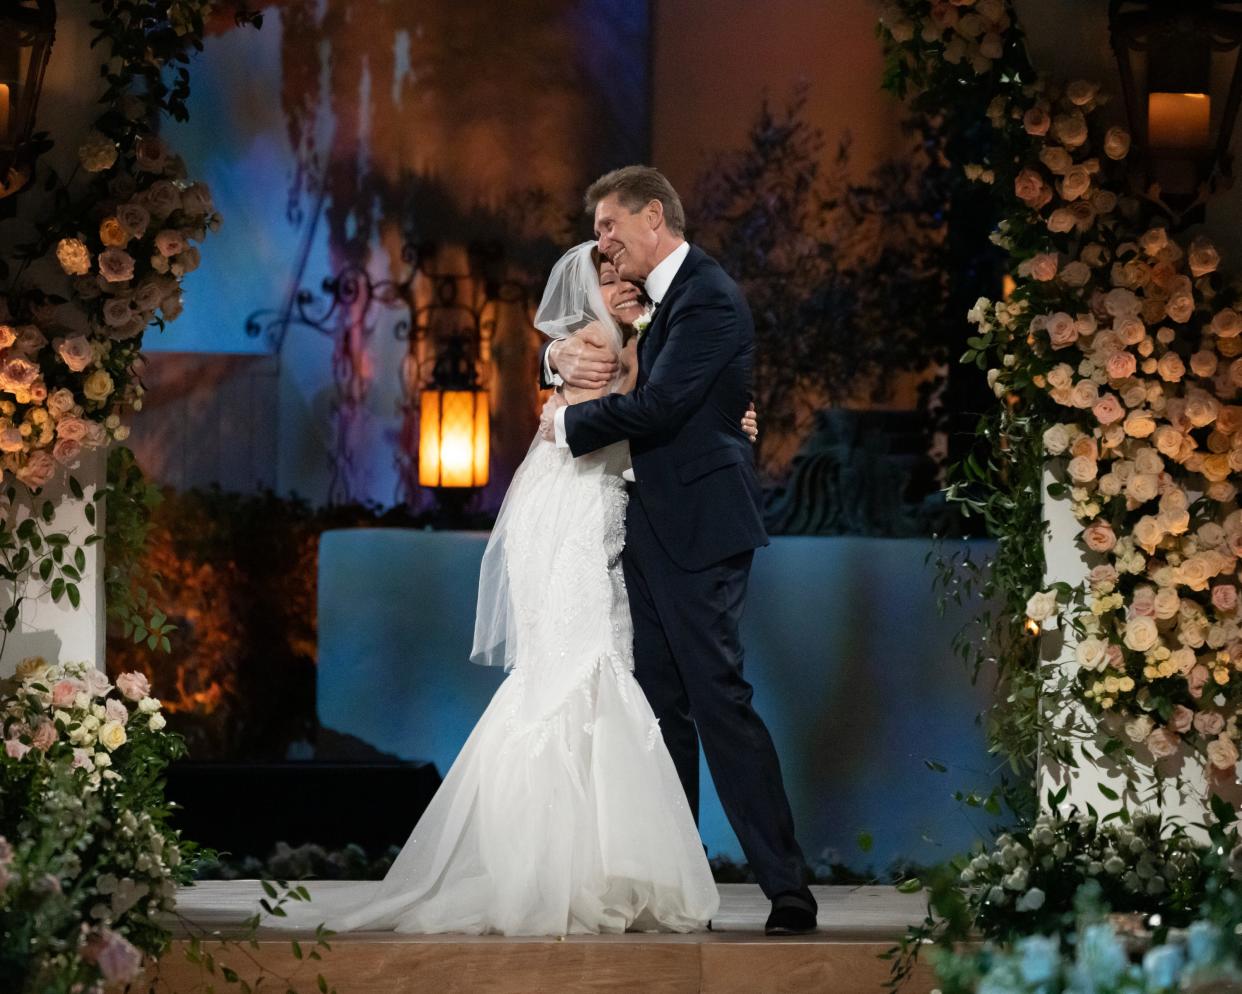 Therese Nist and Gerry Turner of "The Golden Bachelor" embrace following their wedding ceremony on Jan. 4, 2024.